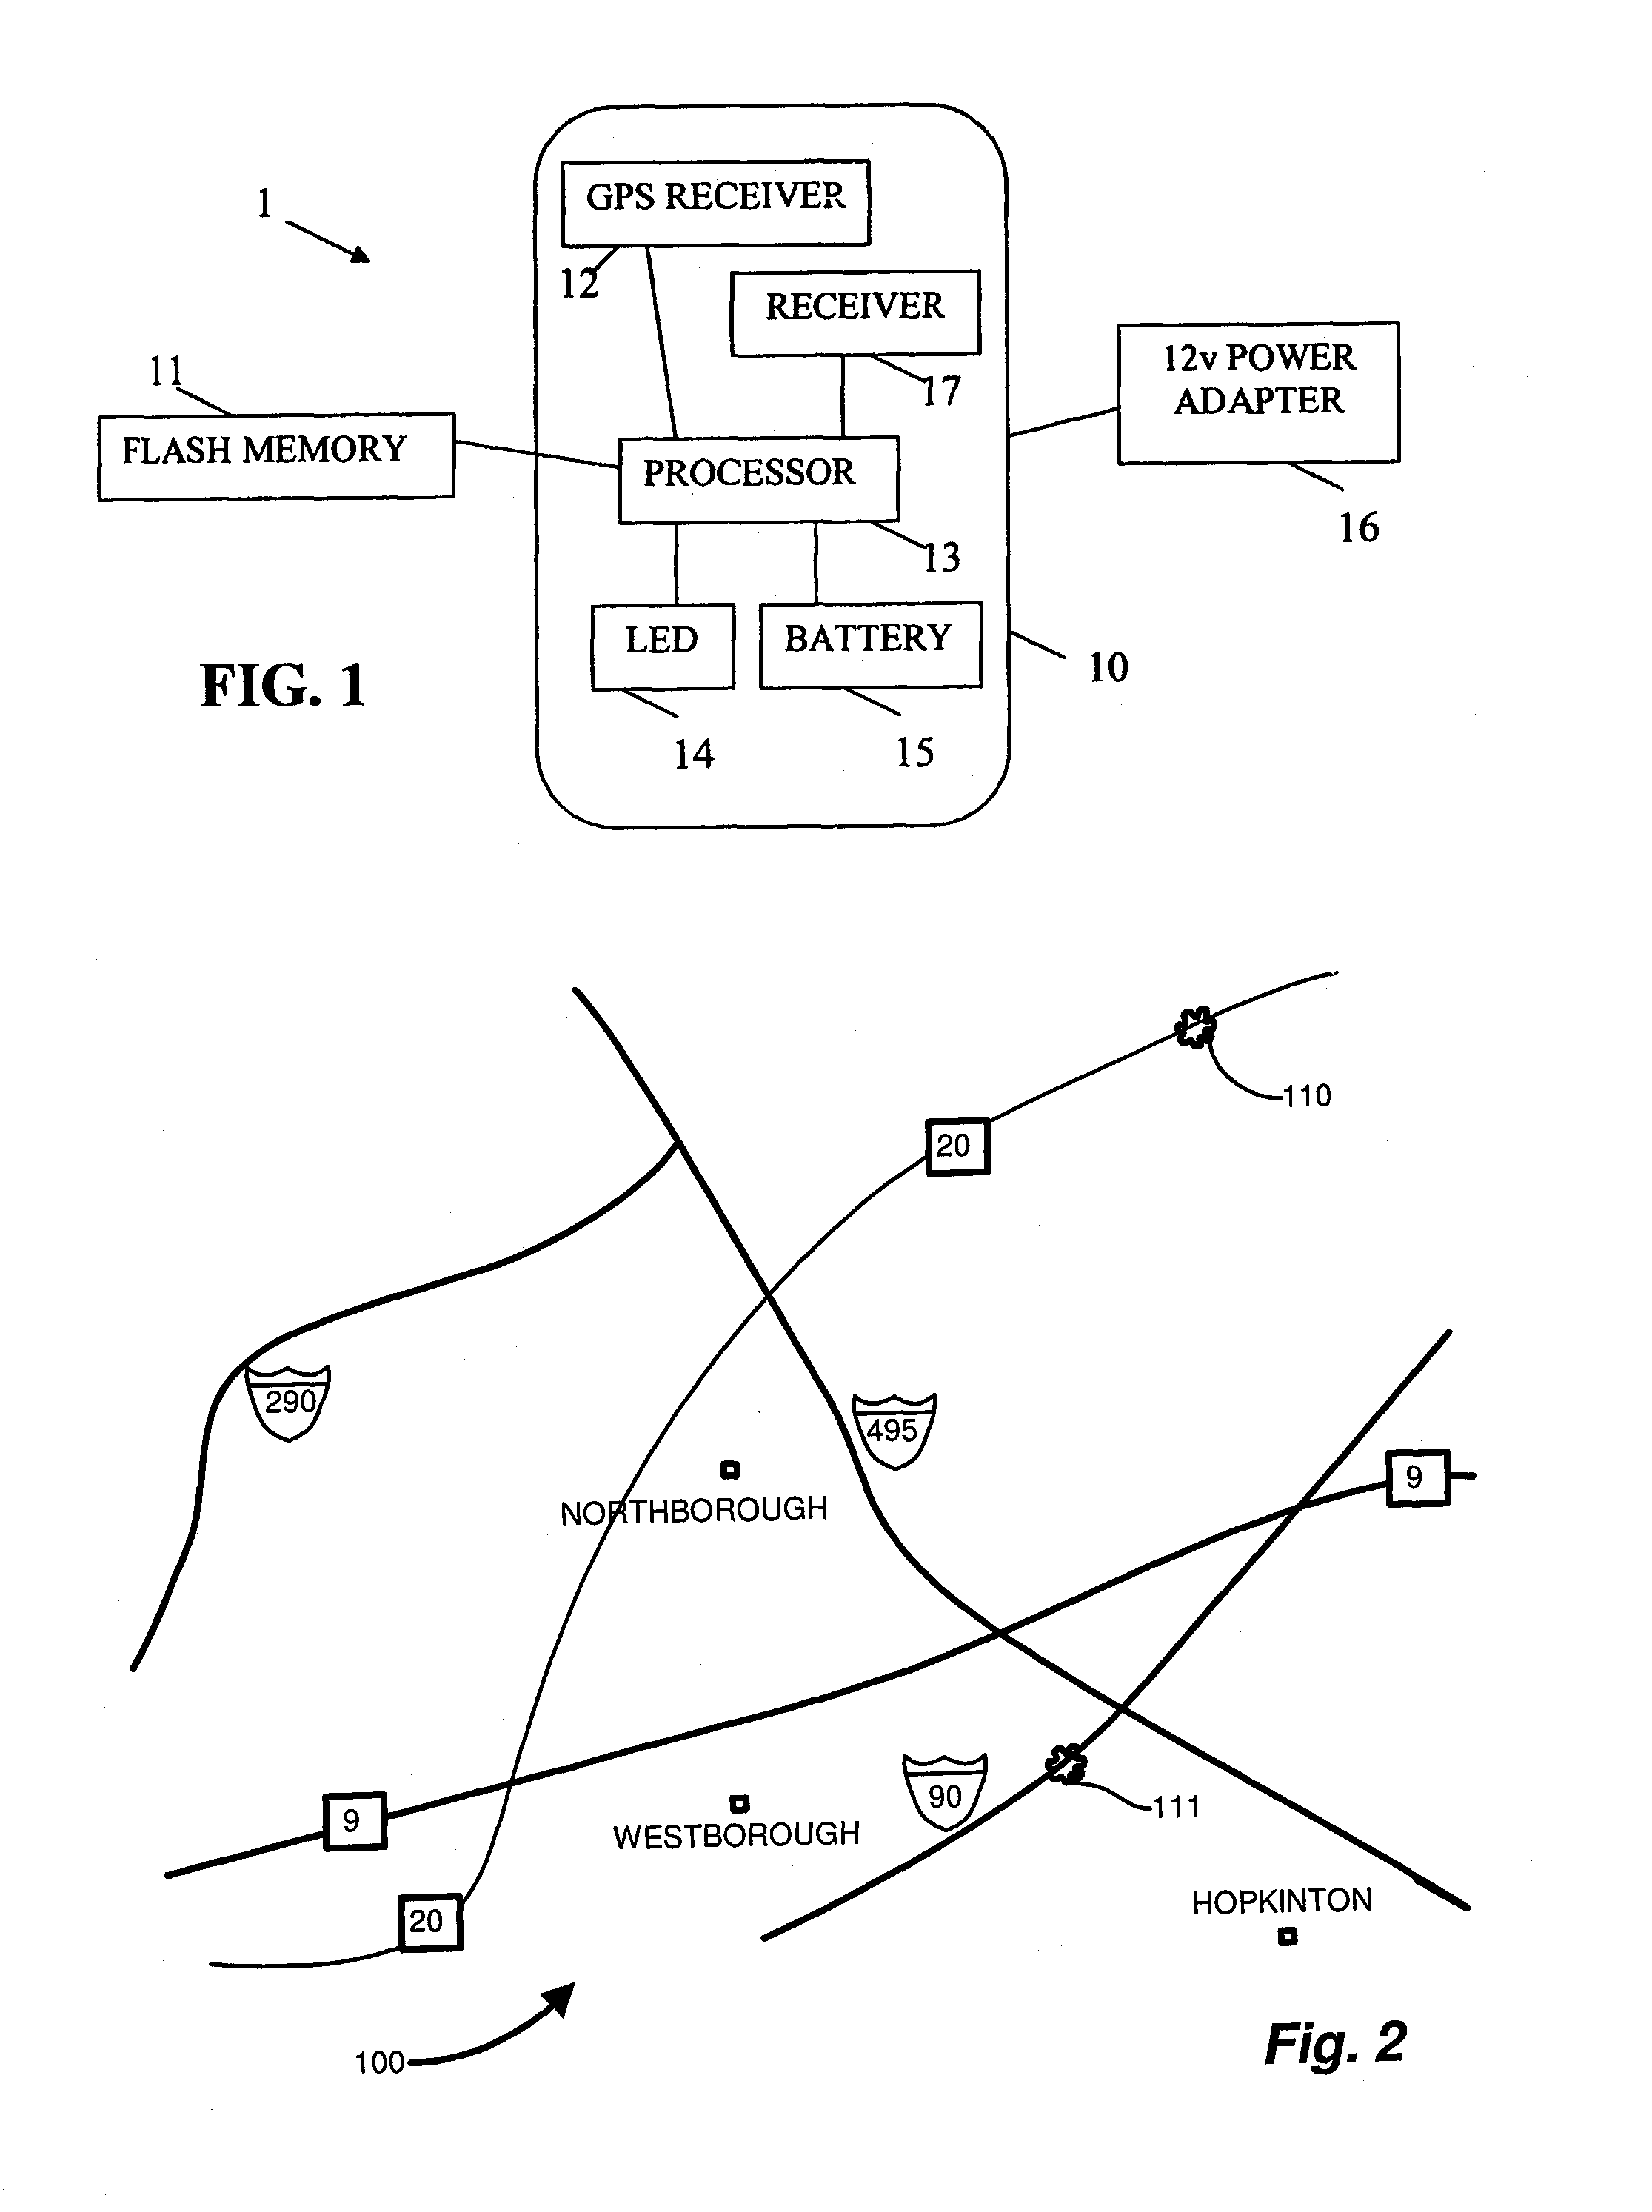 Method and apparatus for determining and storing excessive vehicle speed